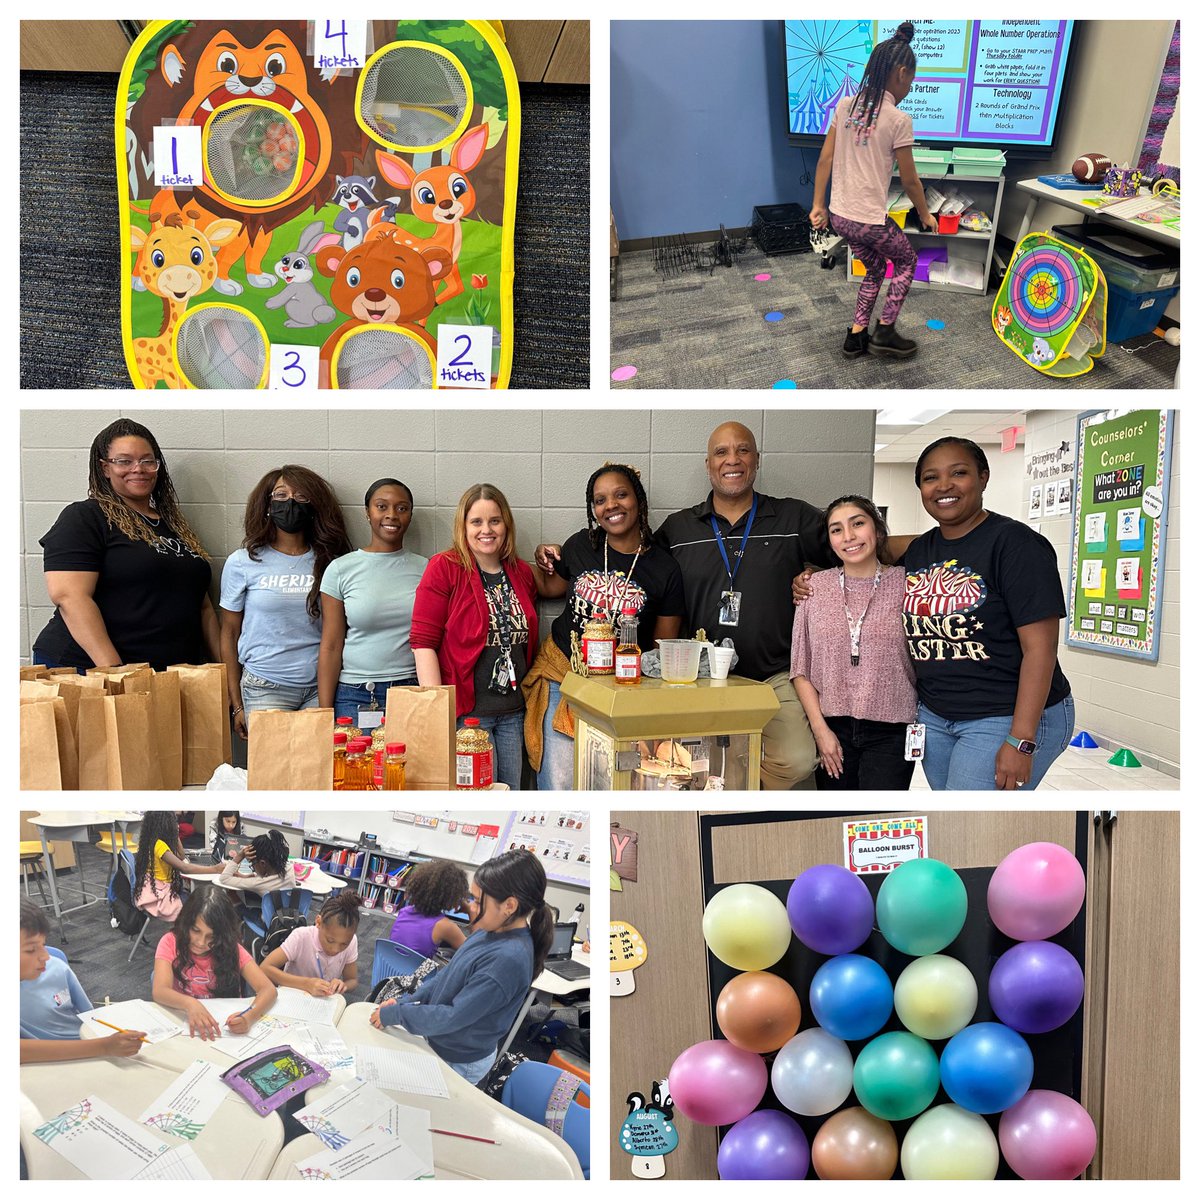 Our 4th grade teachers went above and beyond with their STAAR Carnival Review games, making learning so engaging and fun♥️ @SheridanCFISD